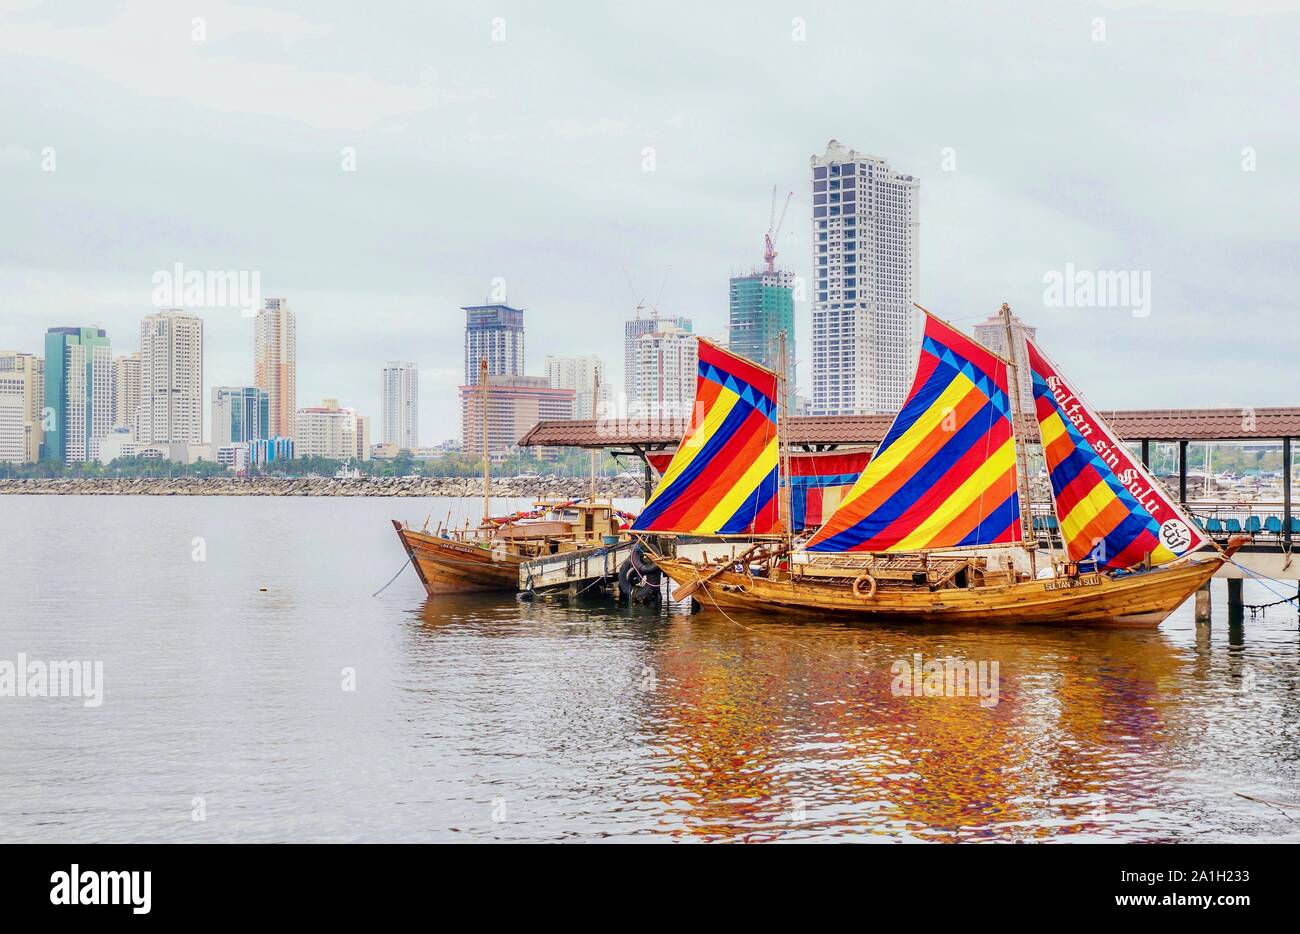 Example of a traditional Filipino wooden sailing vessel called a balangay. The 'Sultan Sin Sulu' is a replica docked in Manila Bay. Stock Photo